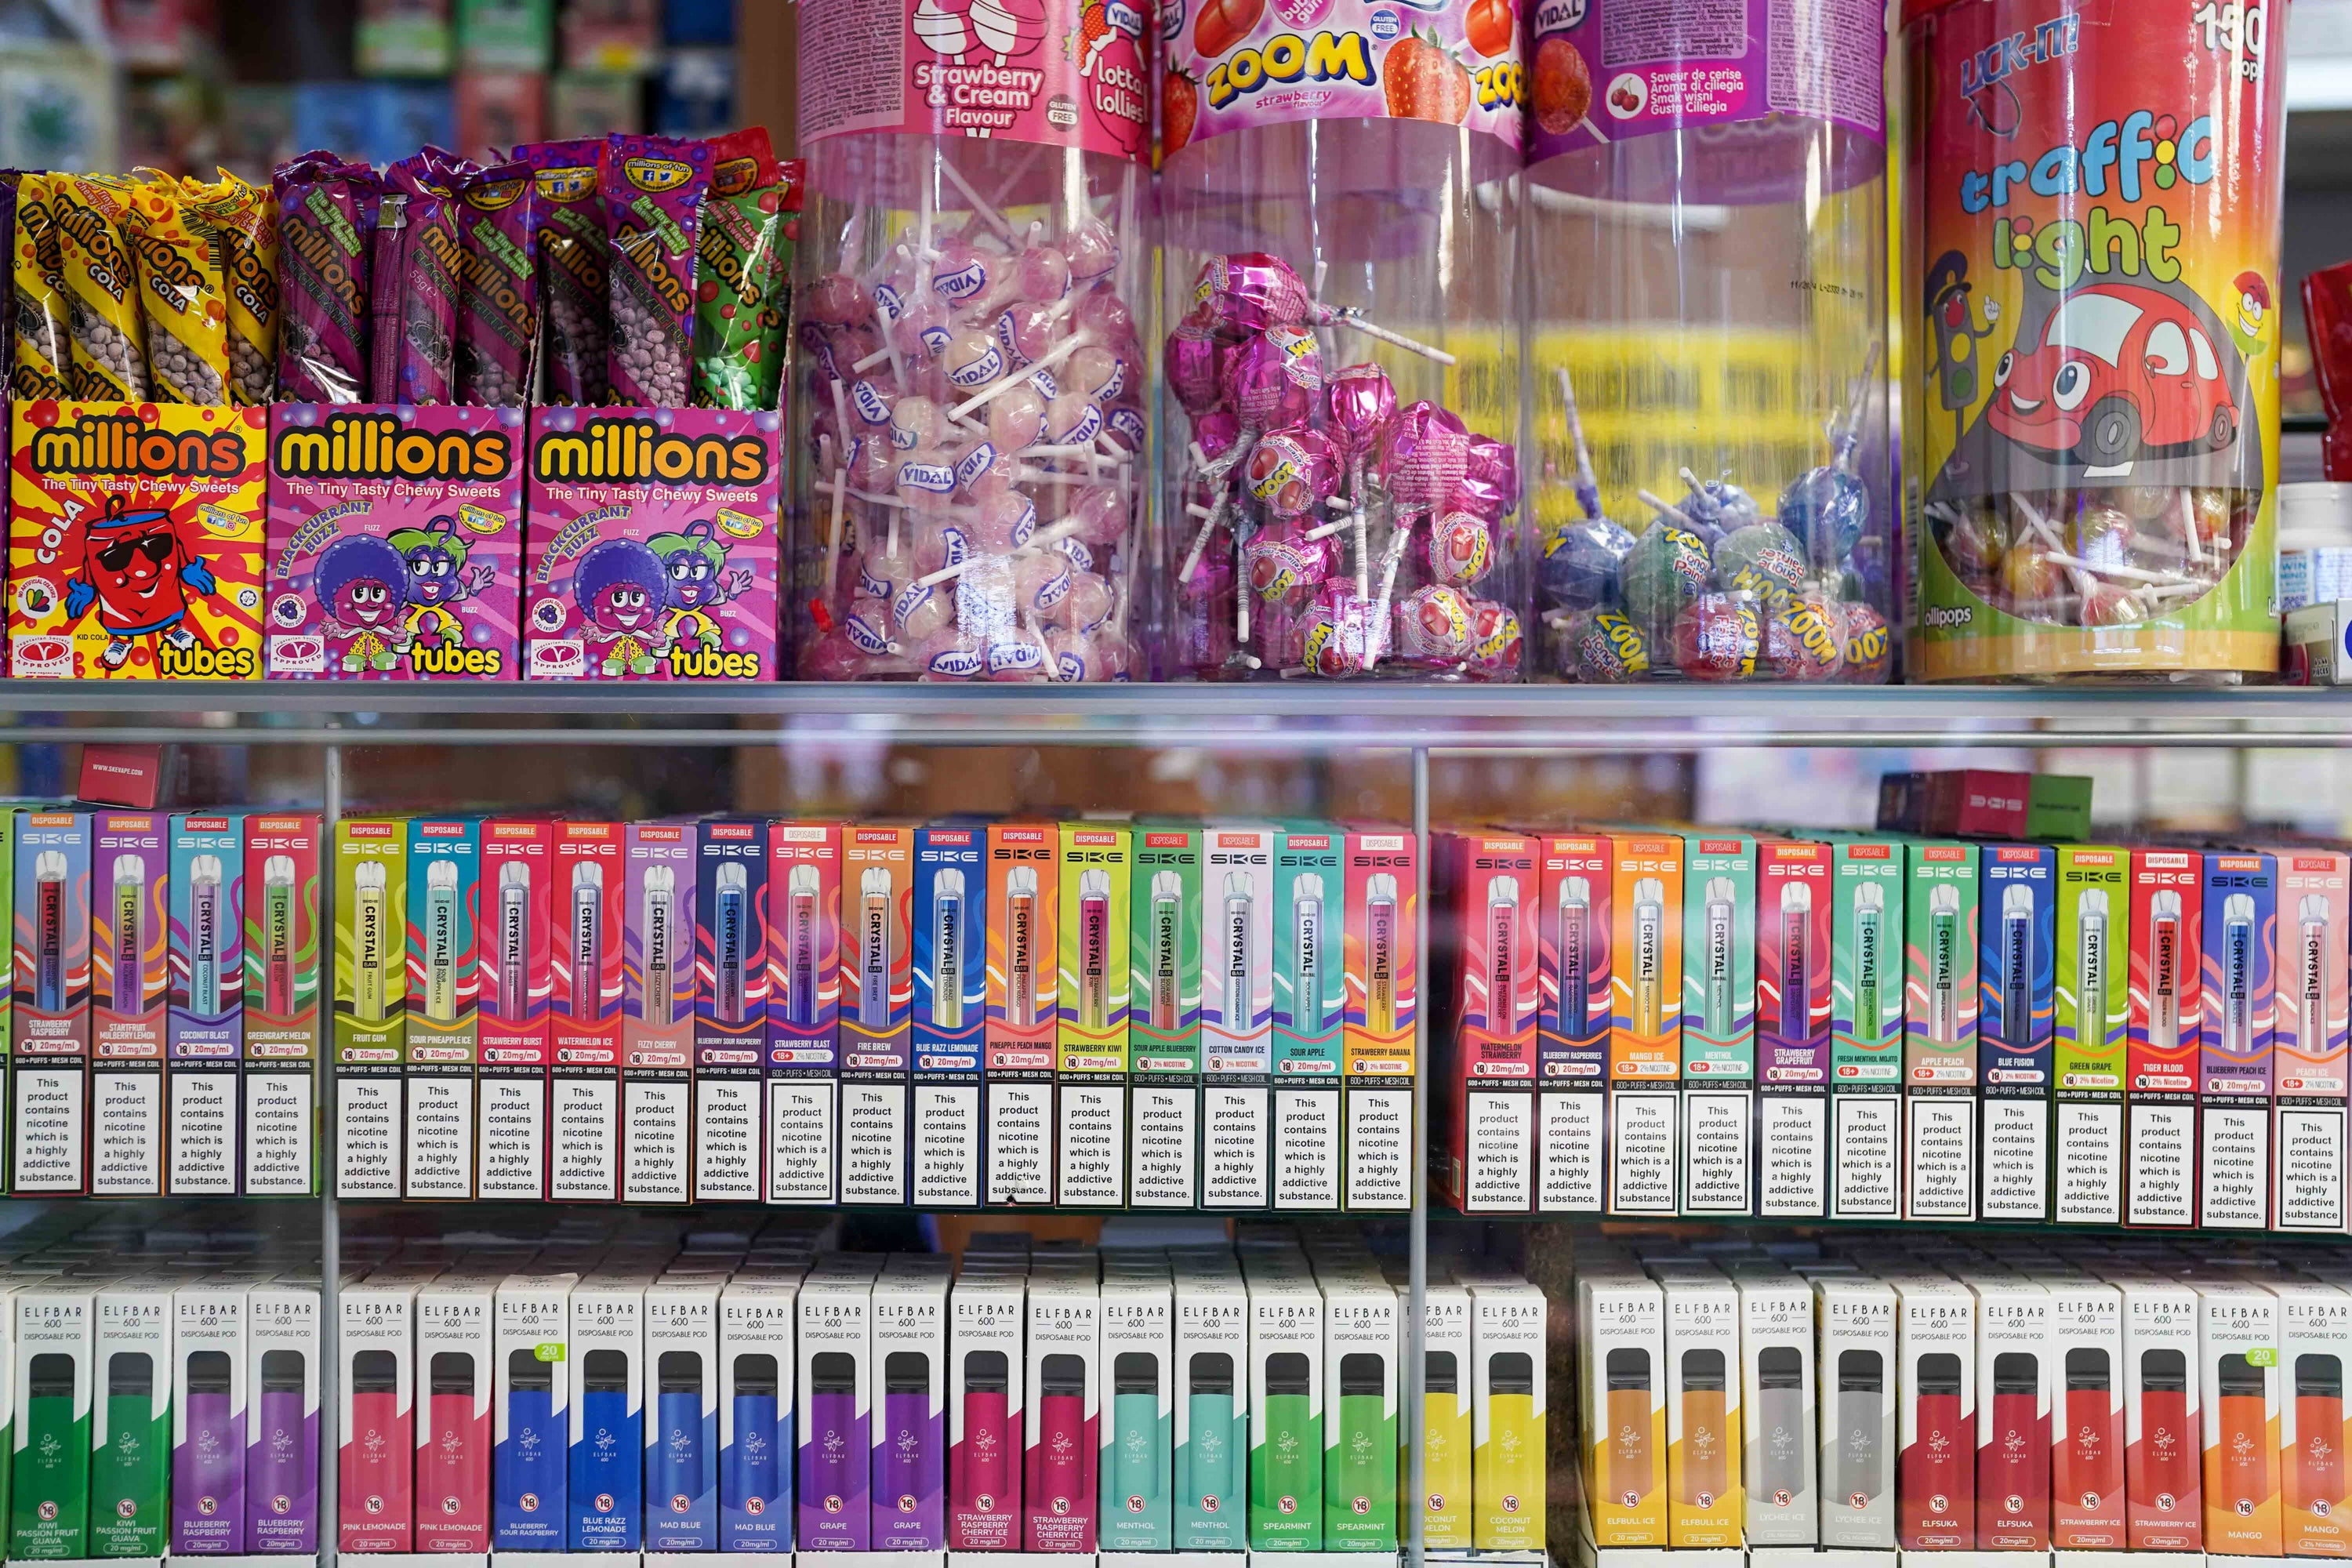 Vape flavours next to sweets in a shop